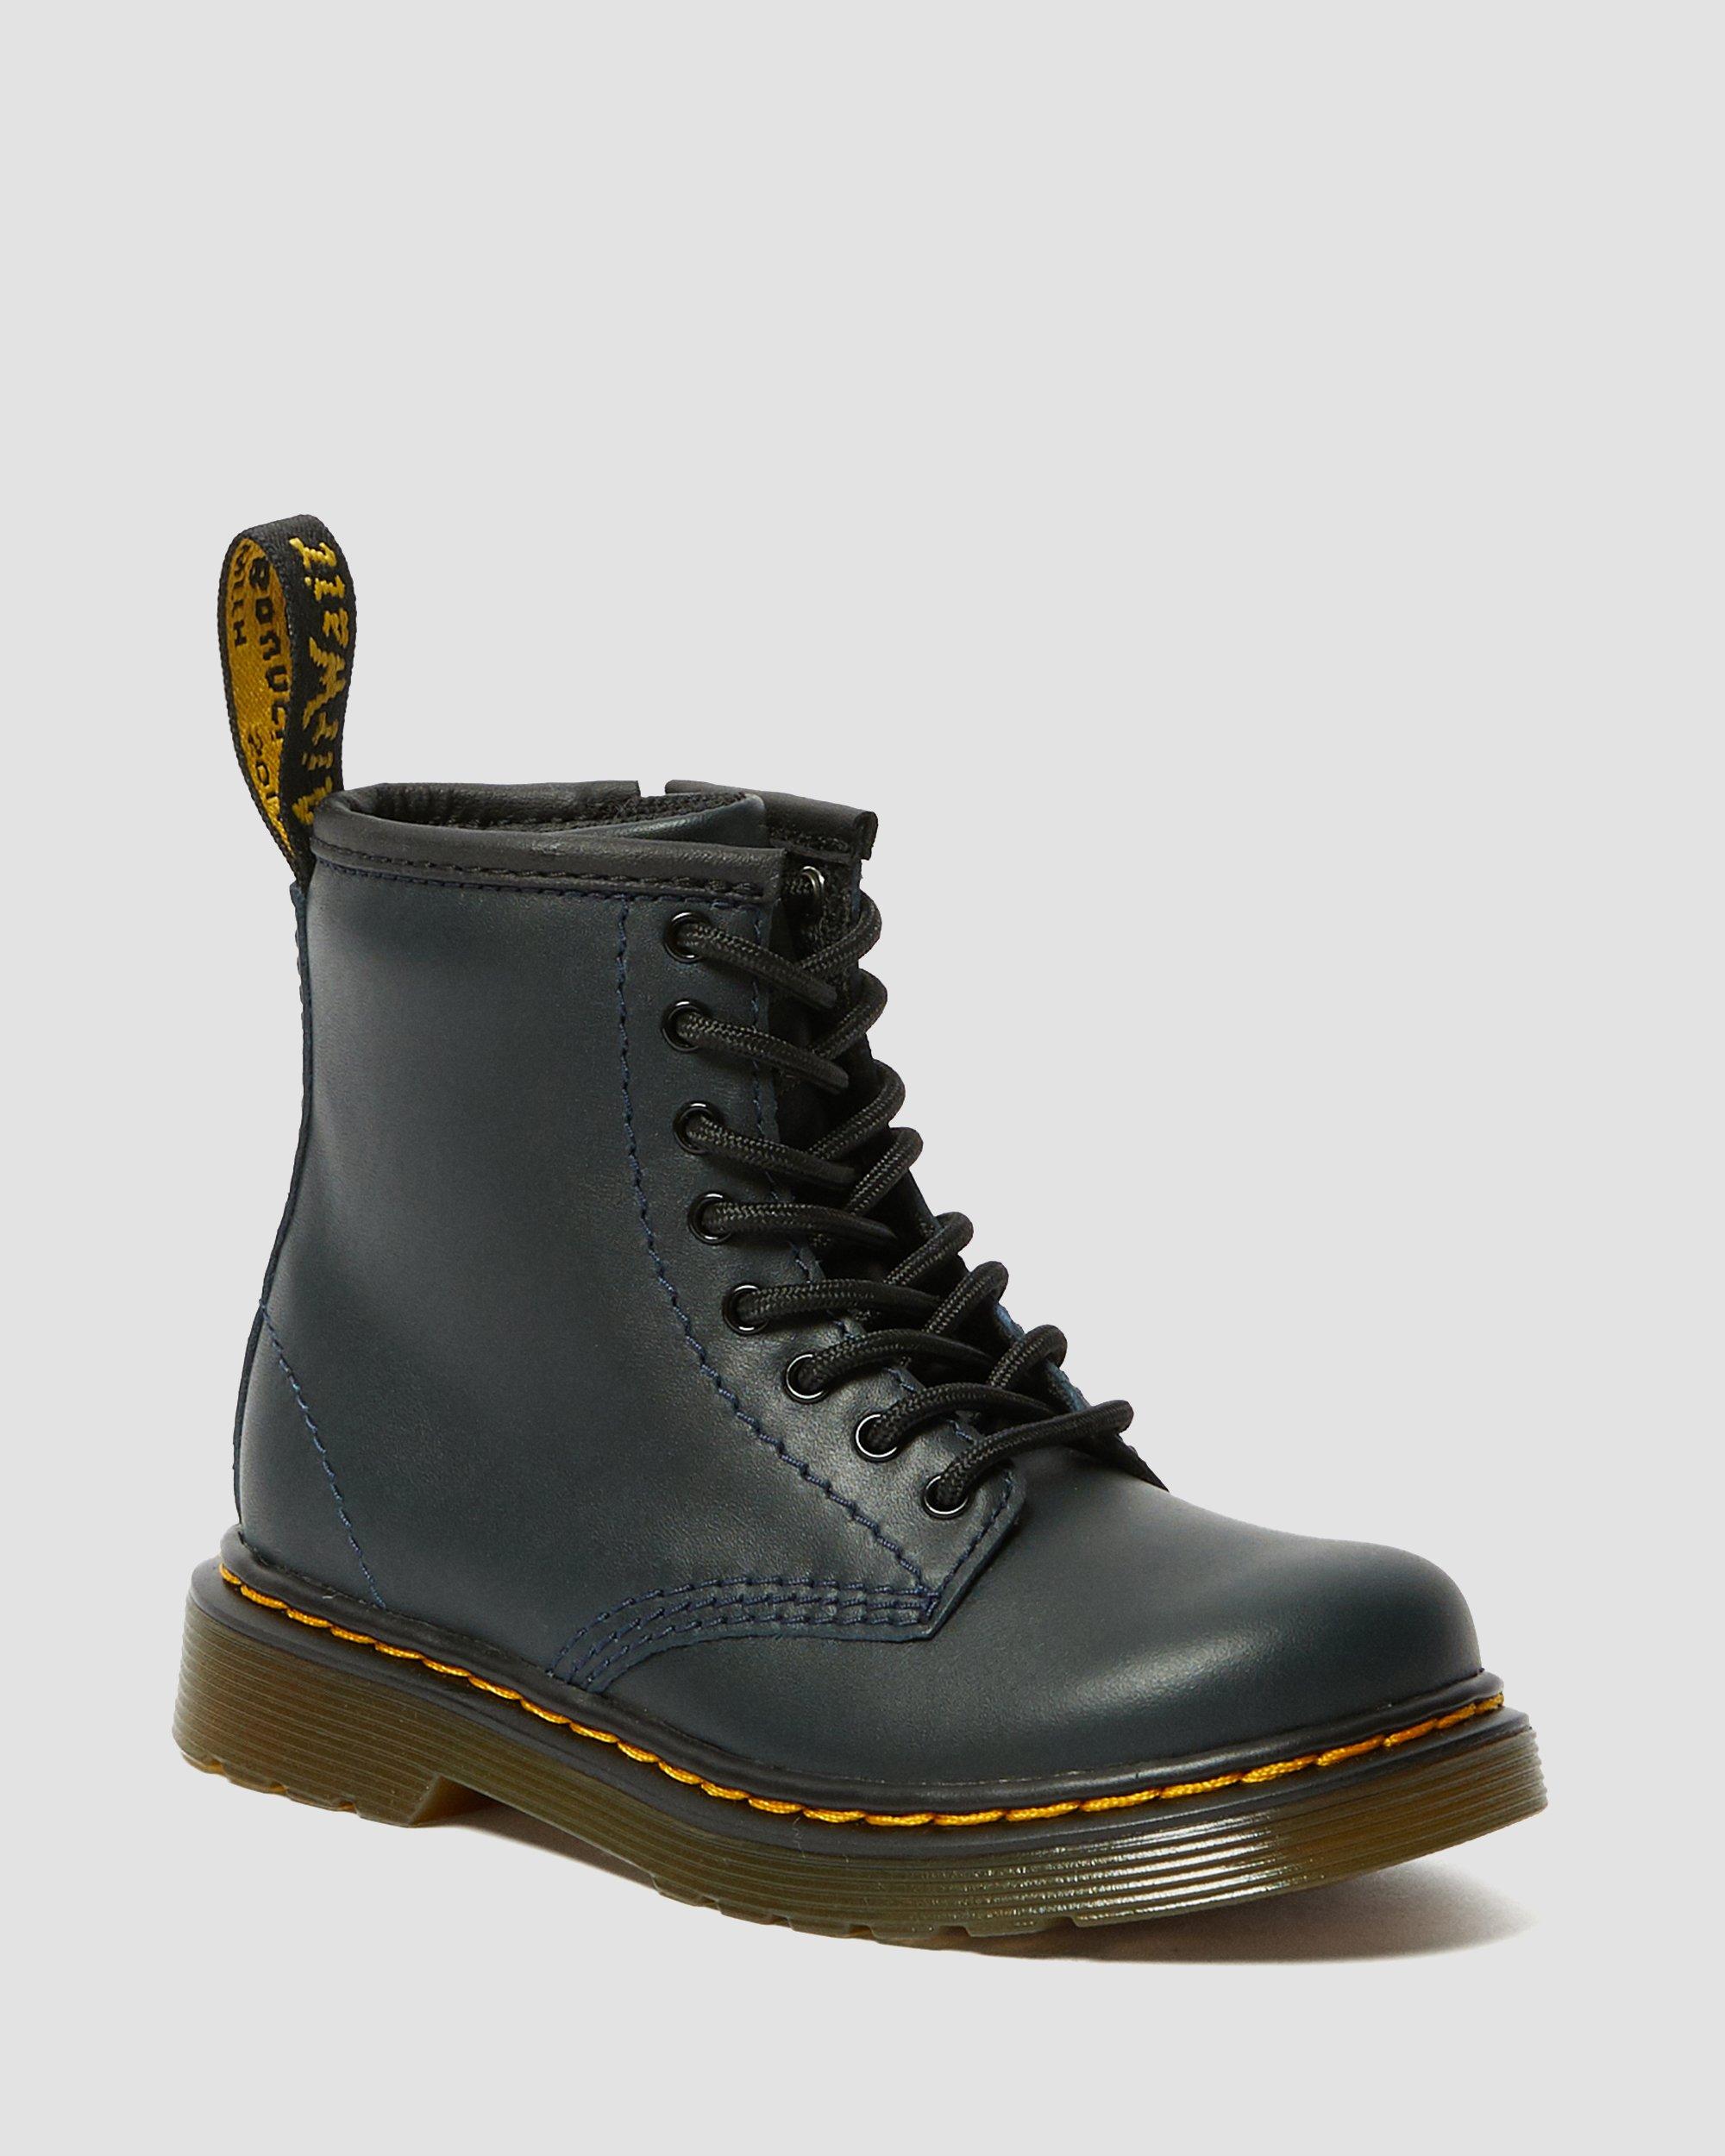 Toddler 1460 Muted Leather Lace Up Boots in Navy | Dr. Martens